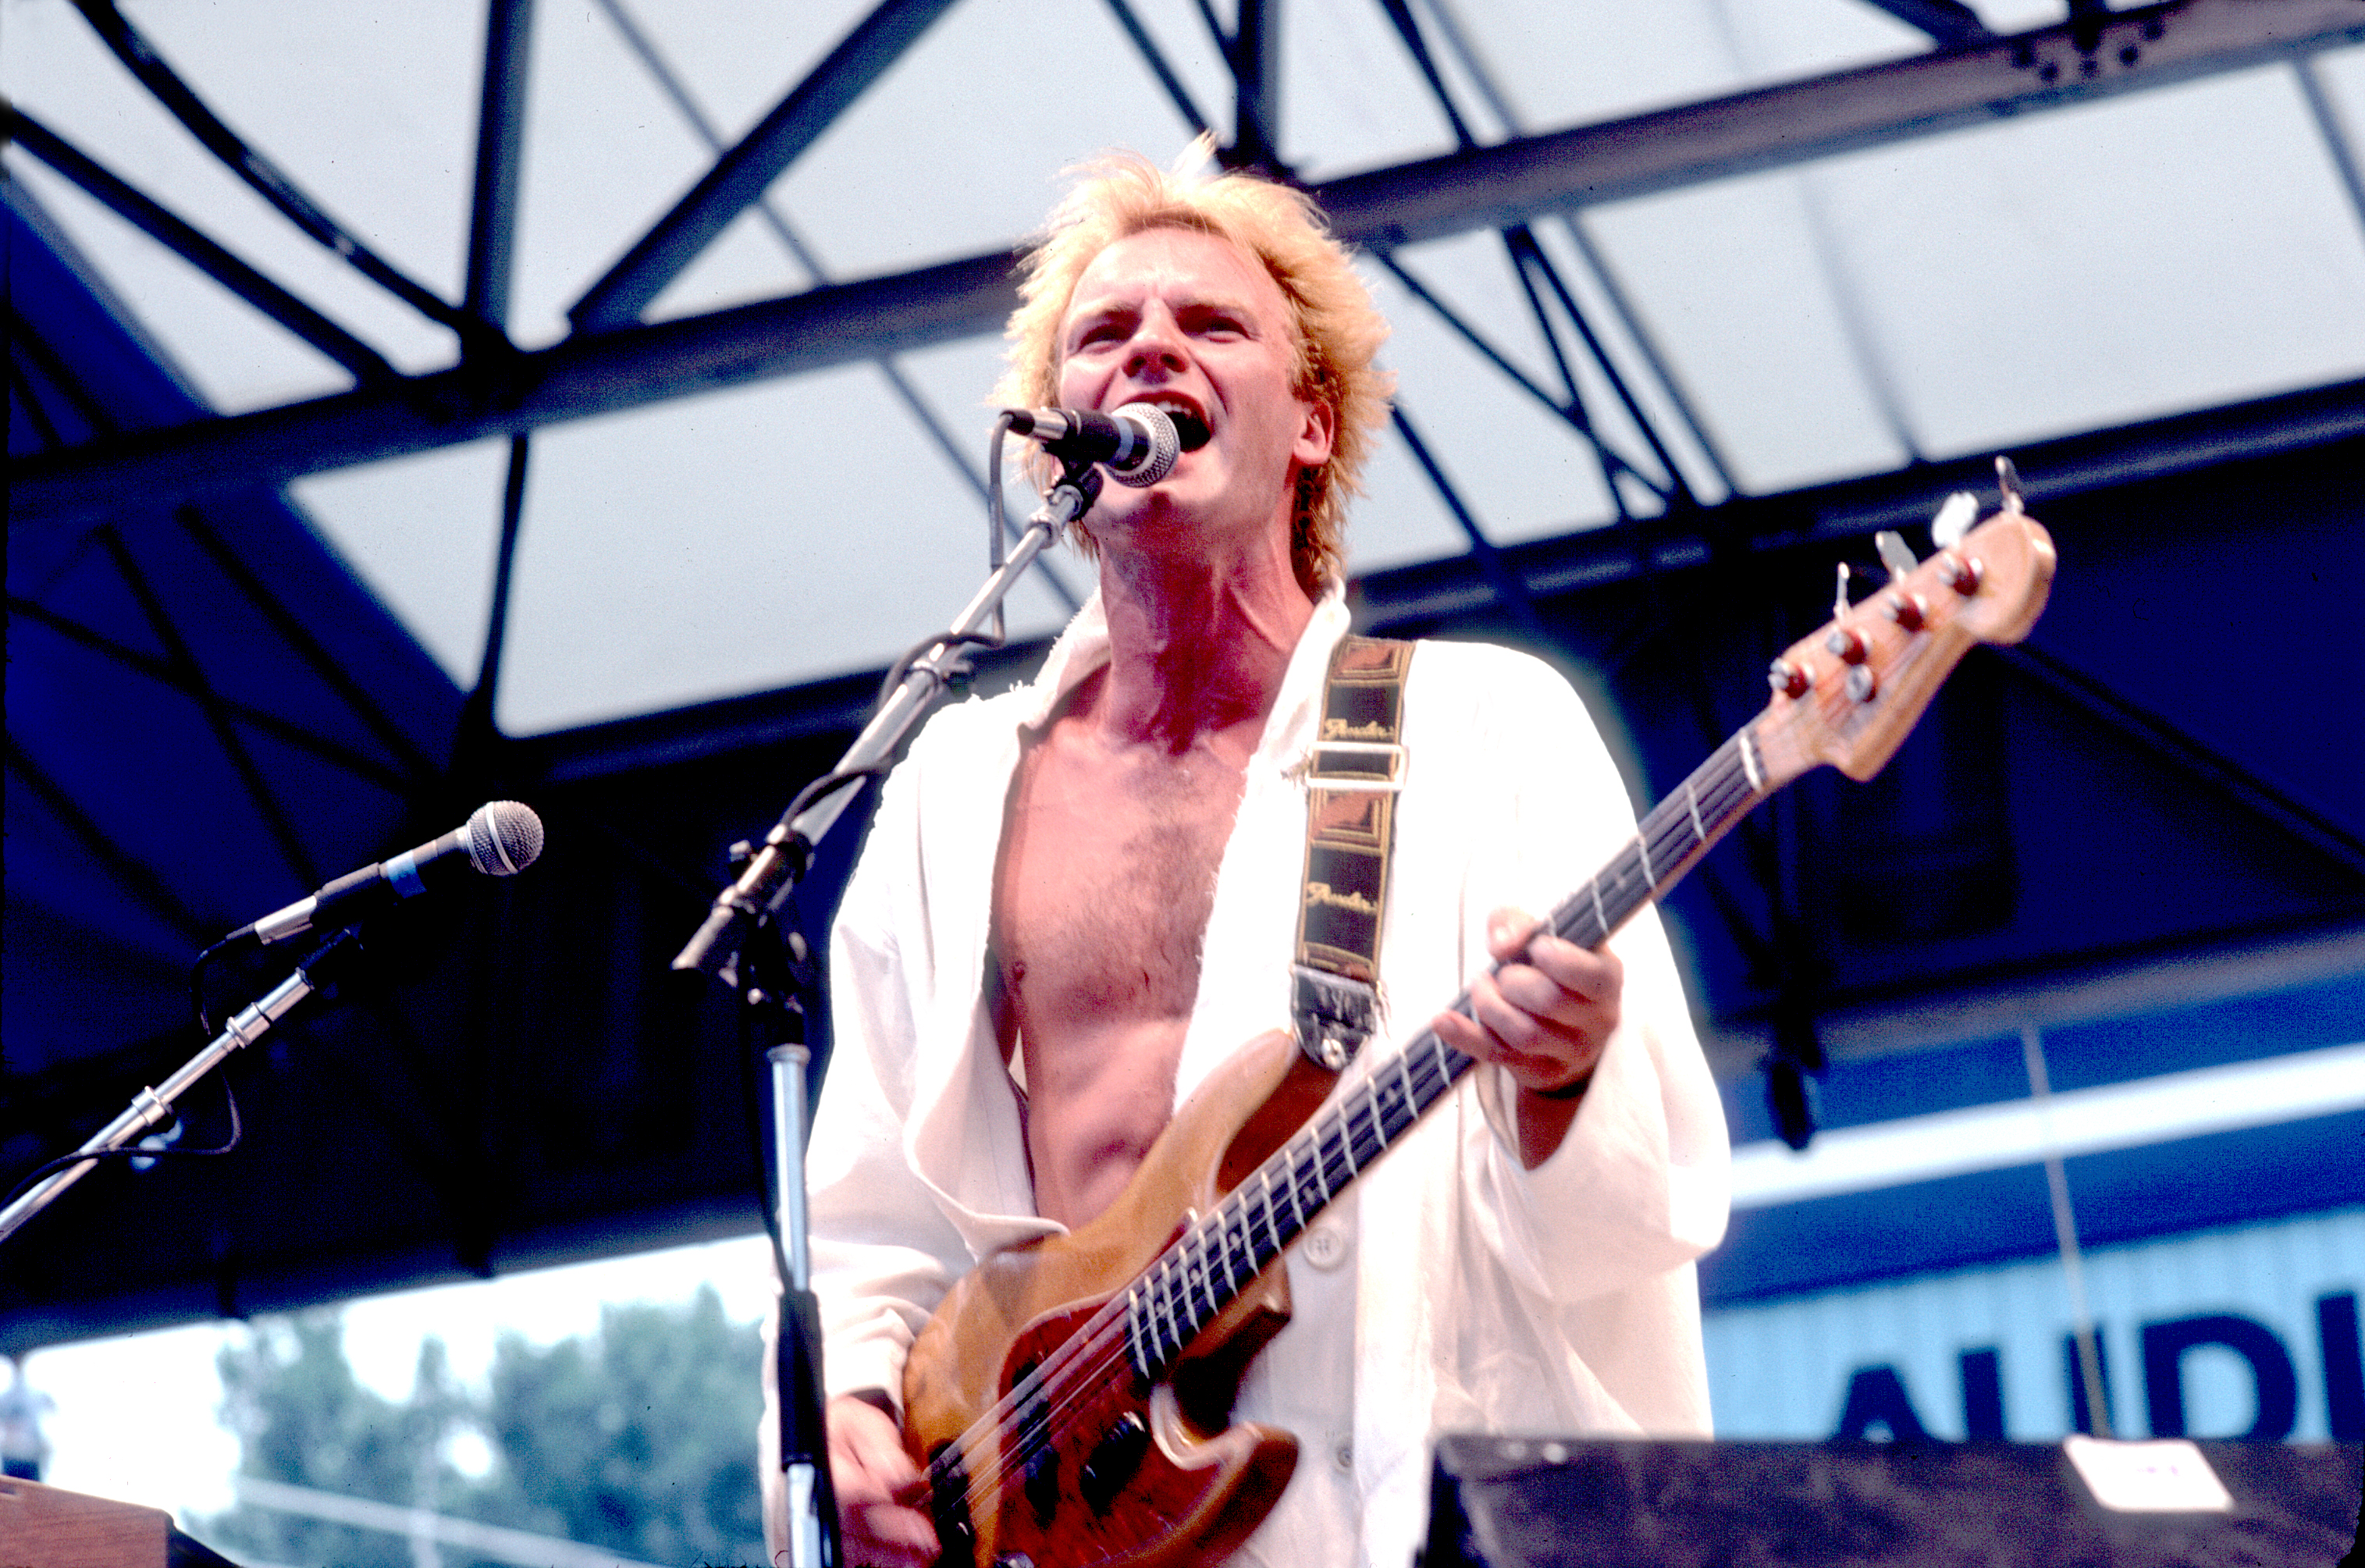 Sting: Our 1985 Cover Story